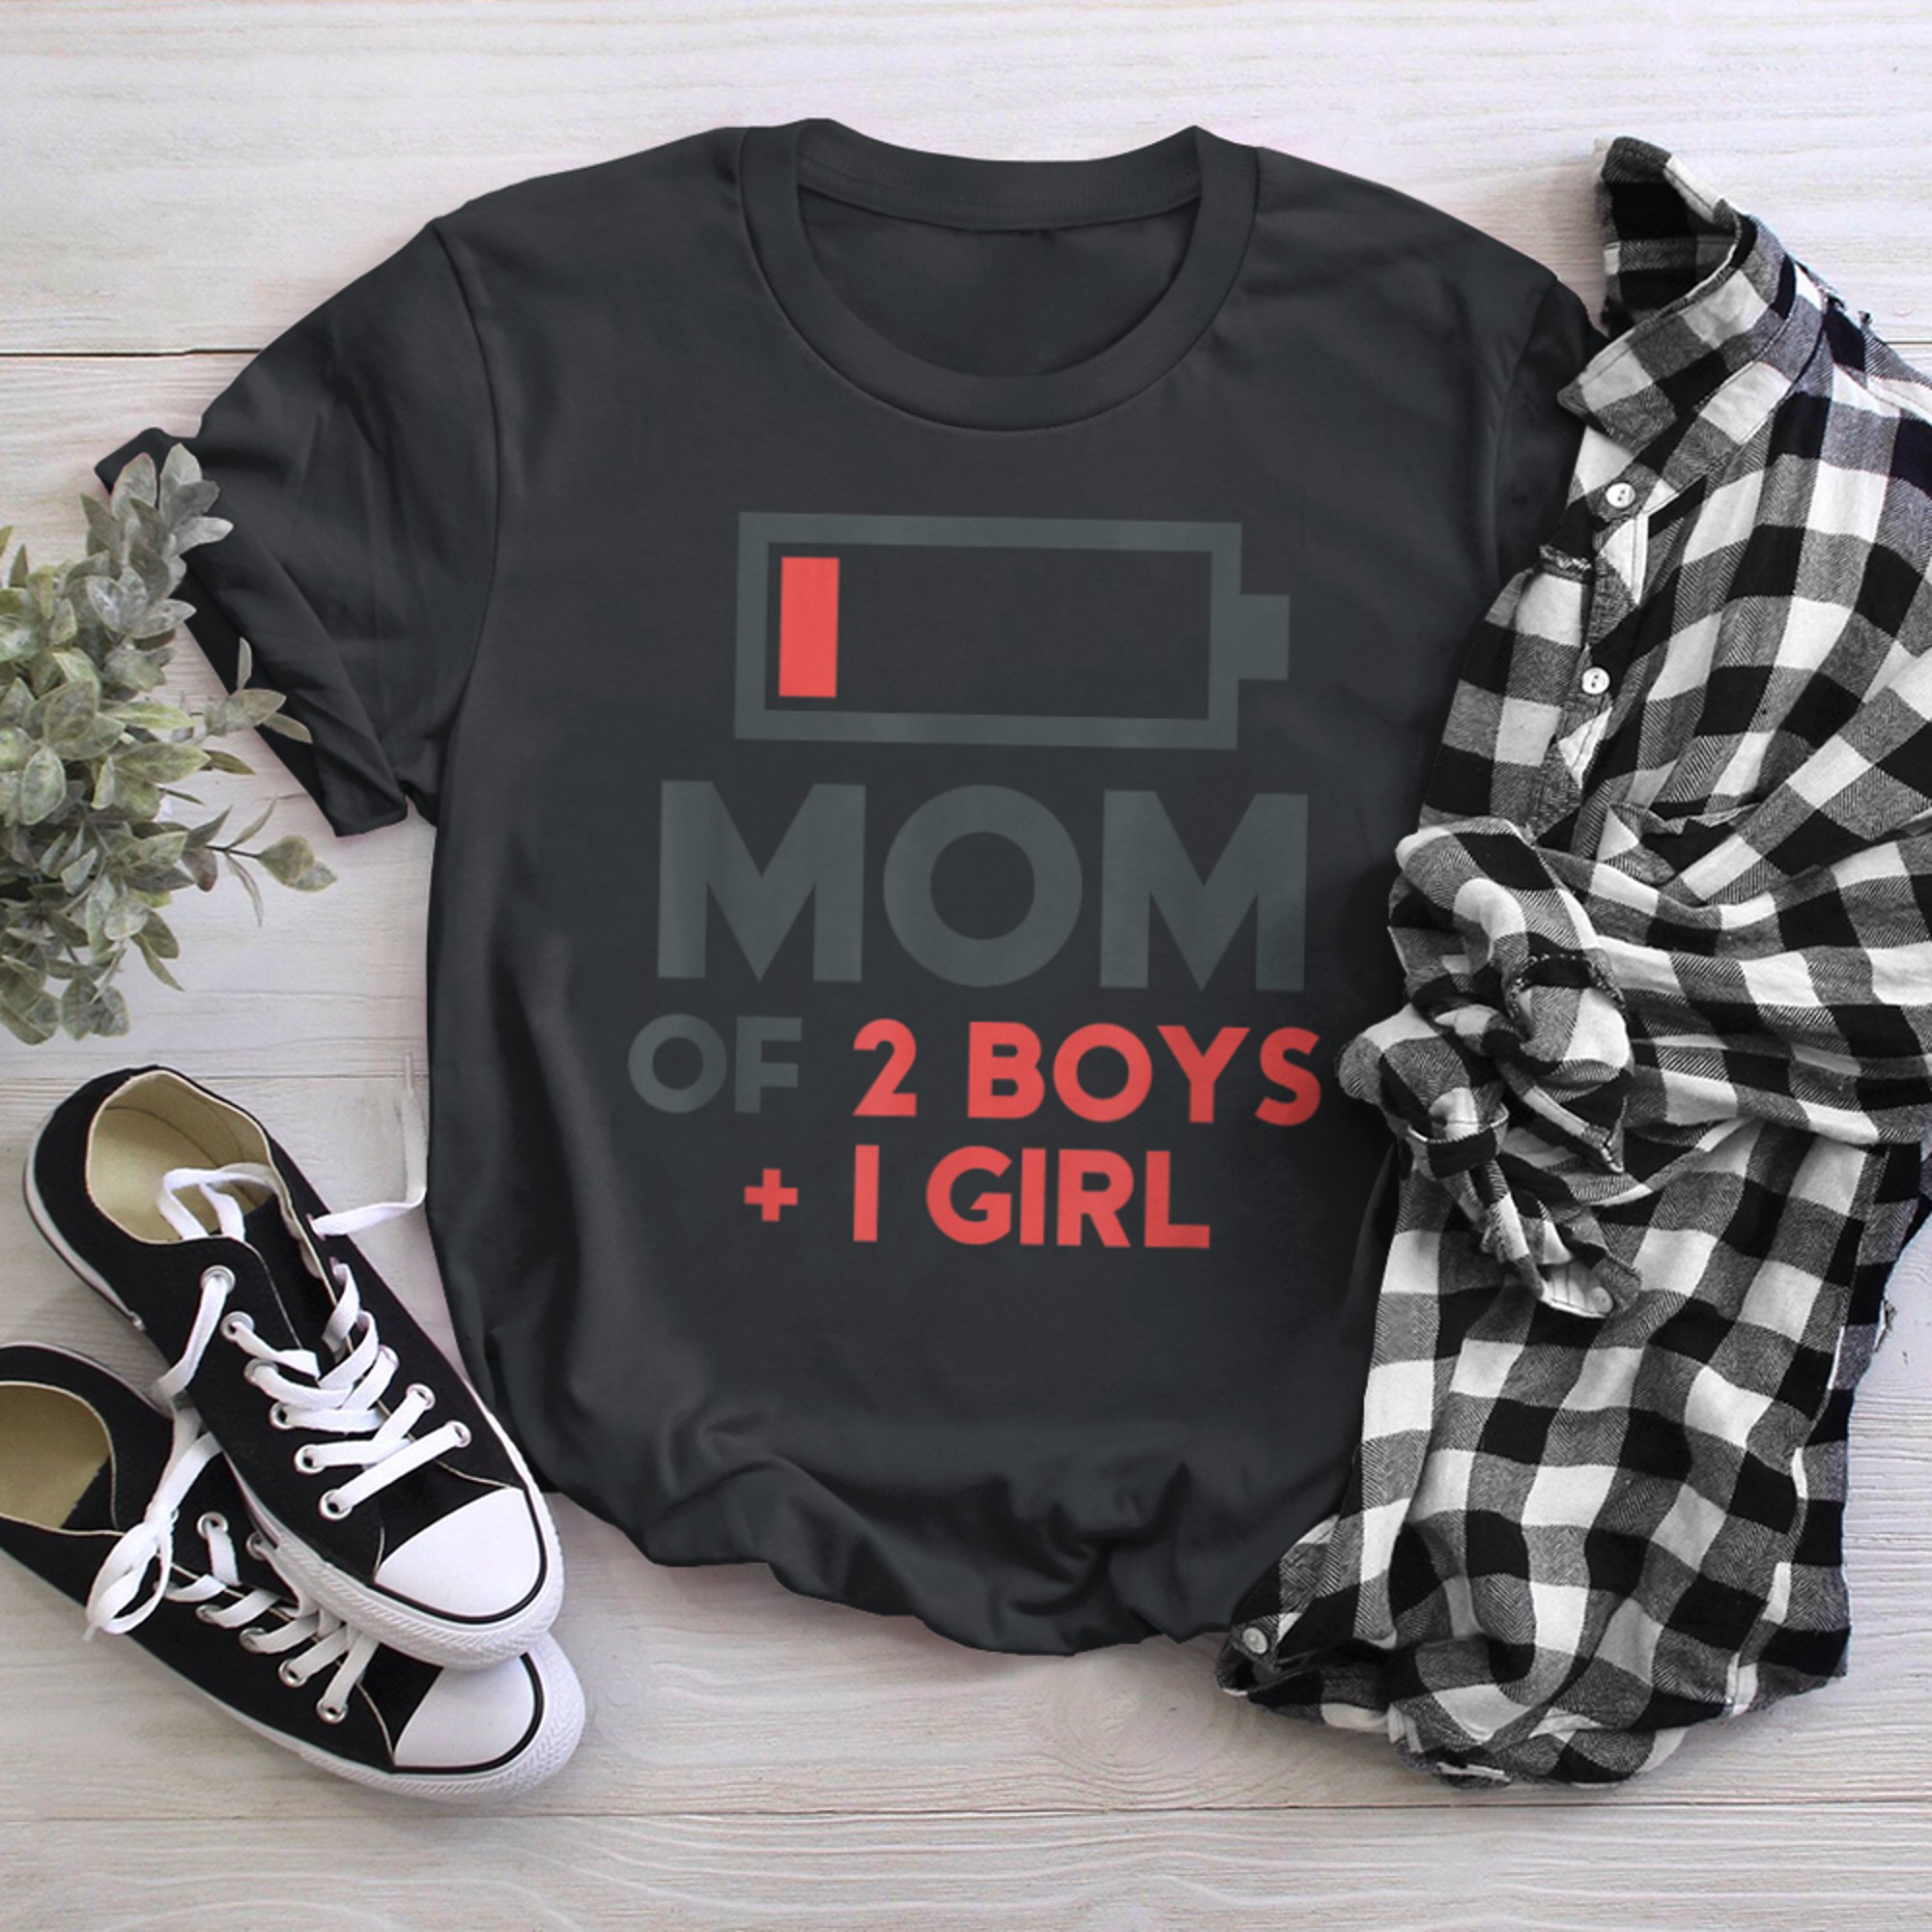 Mom of Son Mothers Day Birthday t-shirt black